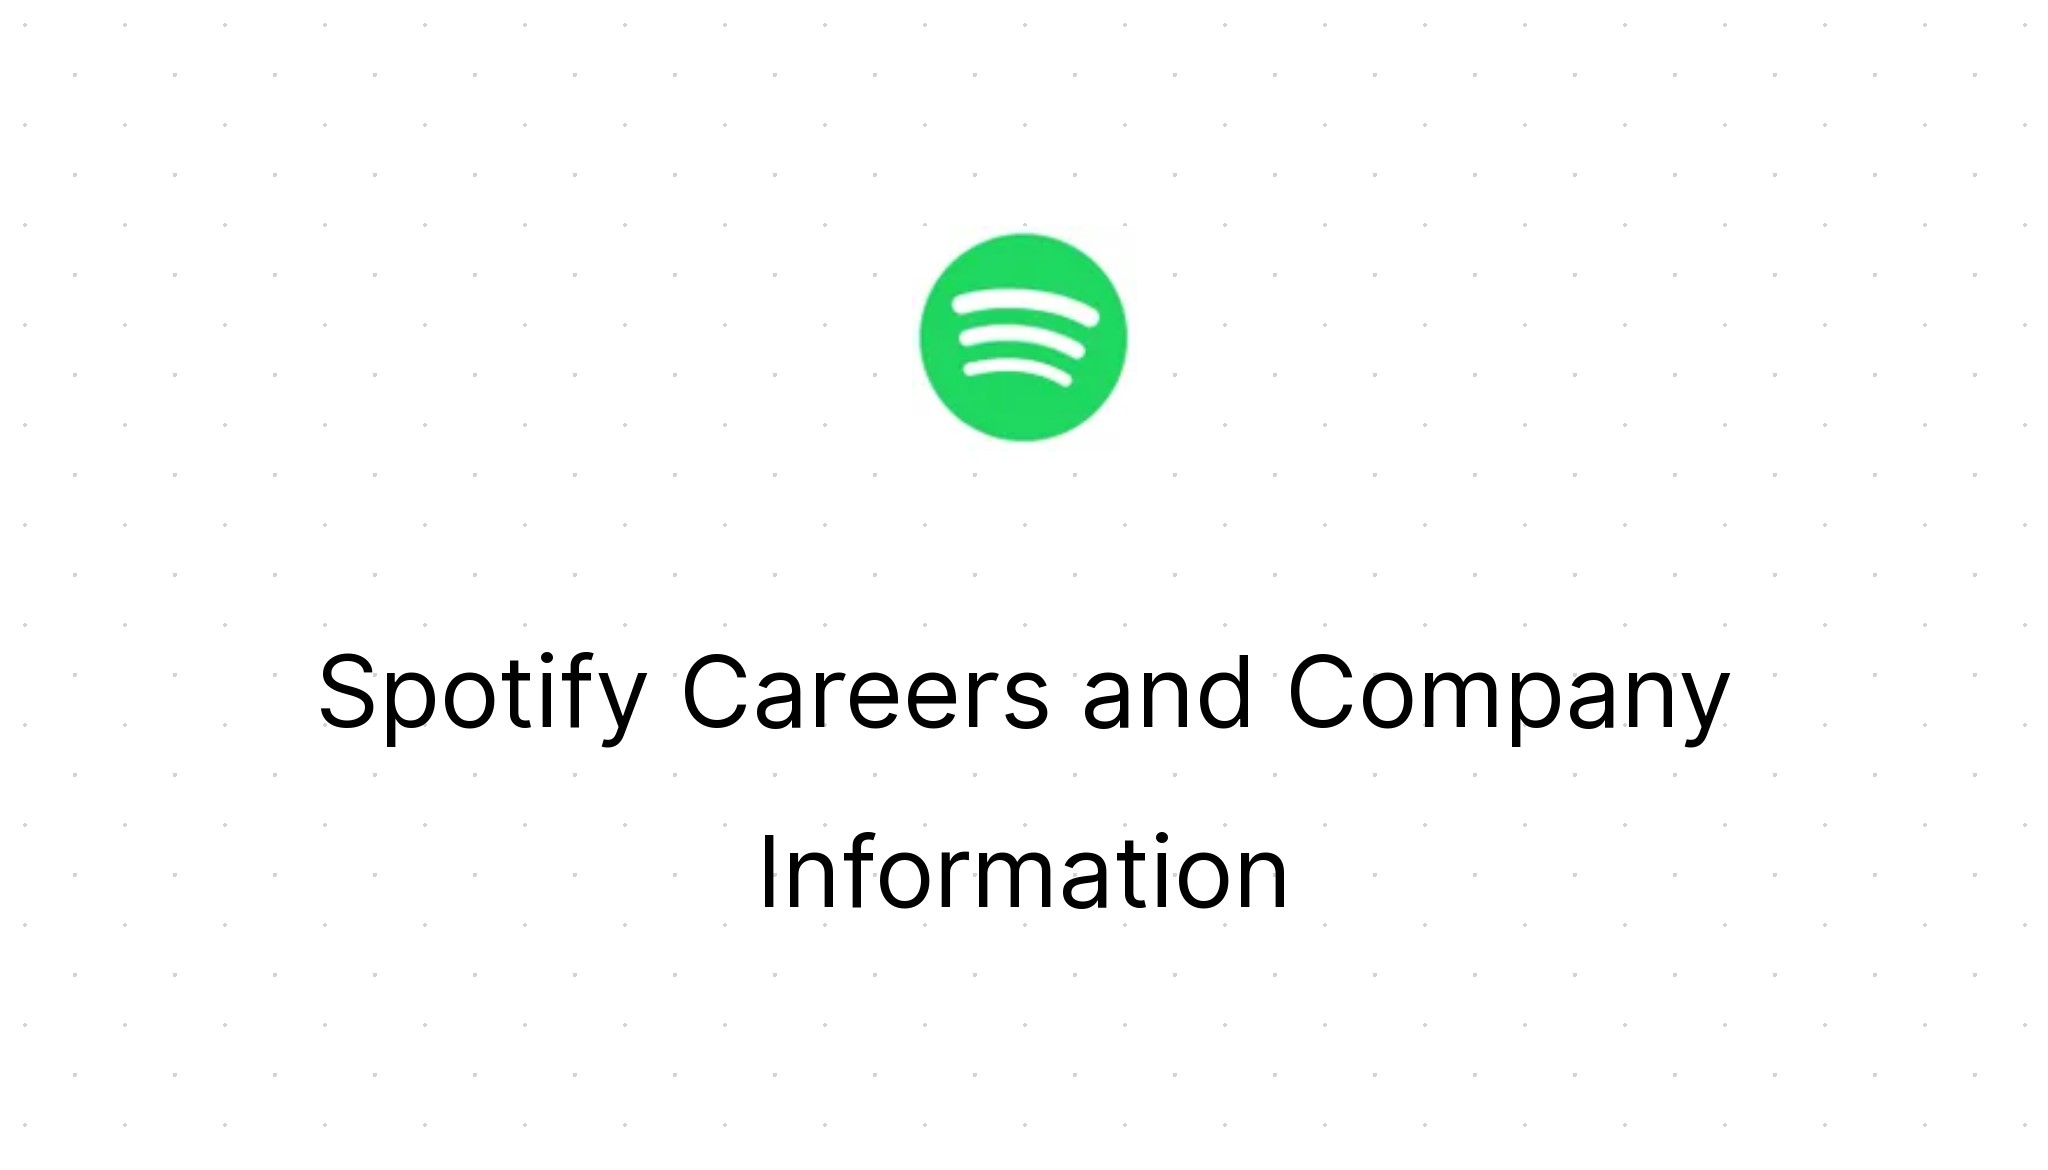 Spotify Careers: How to Work for the Company 2